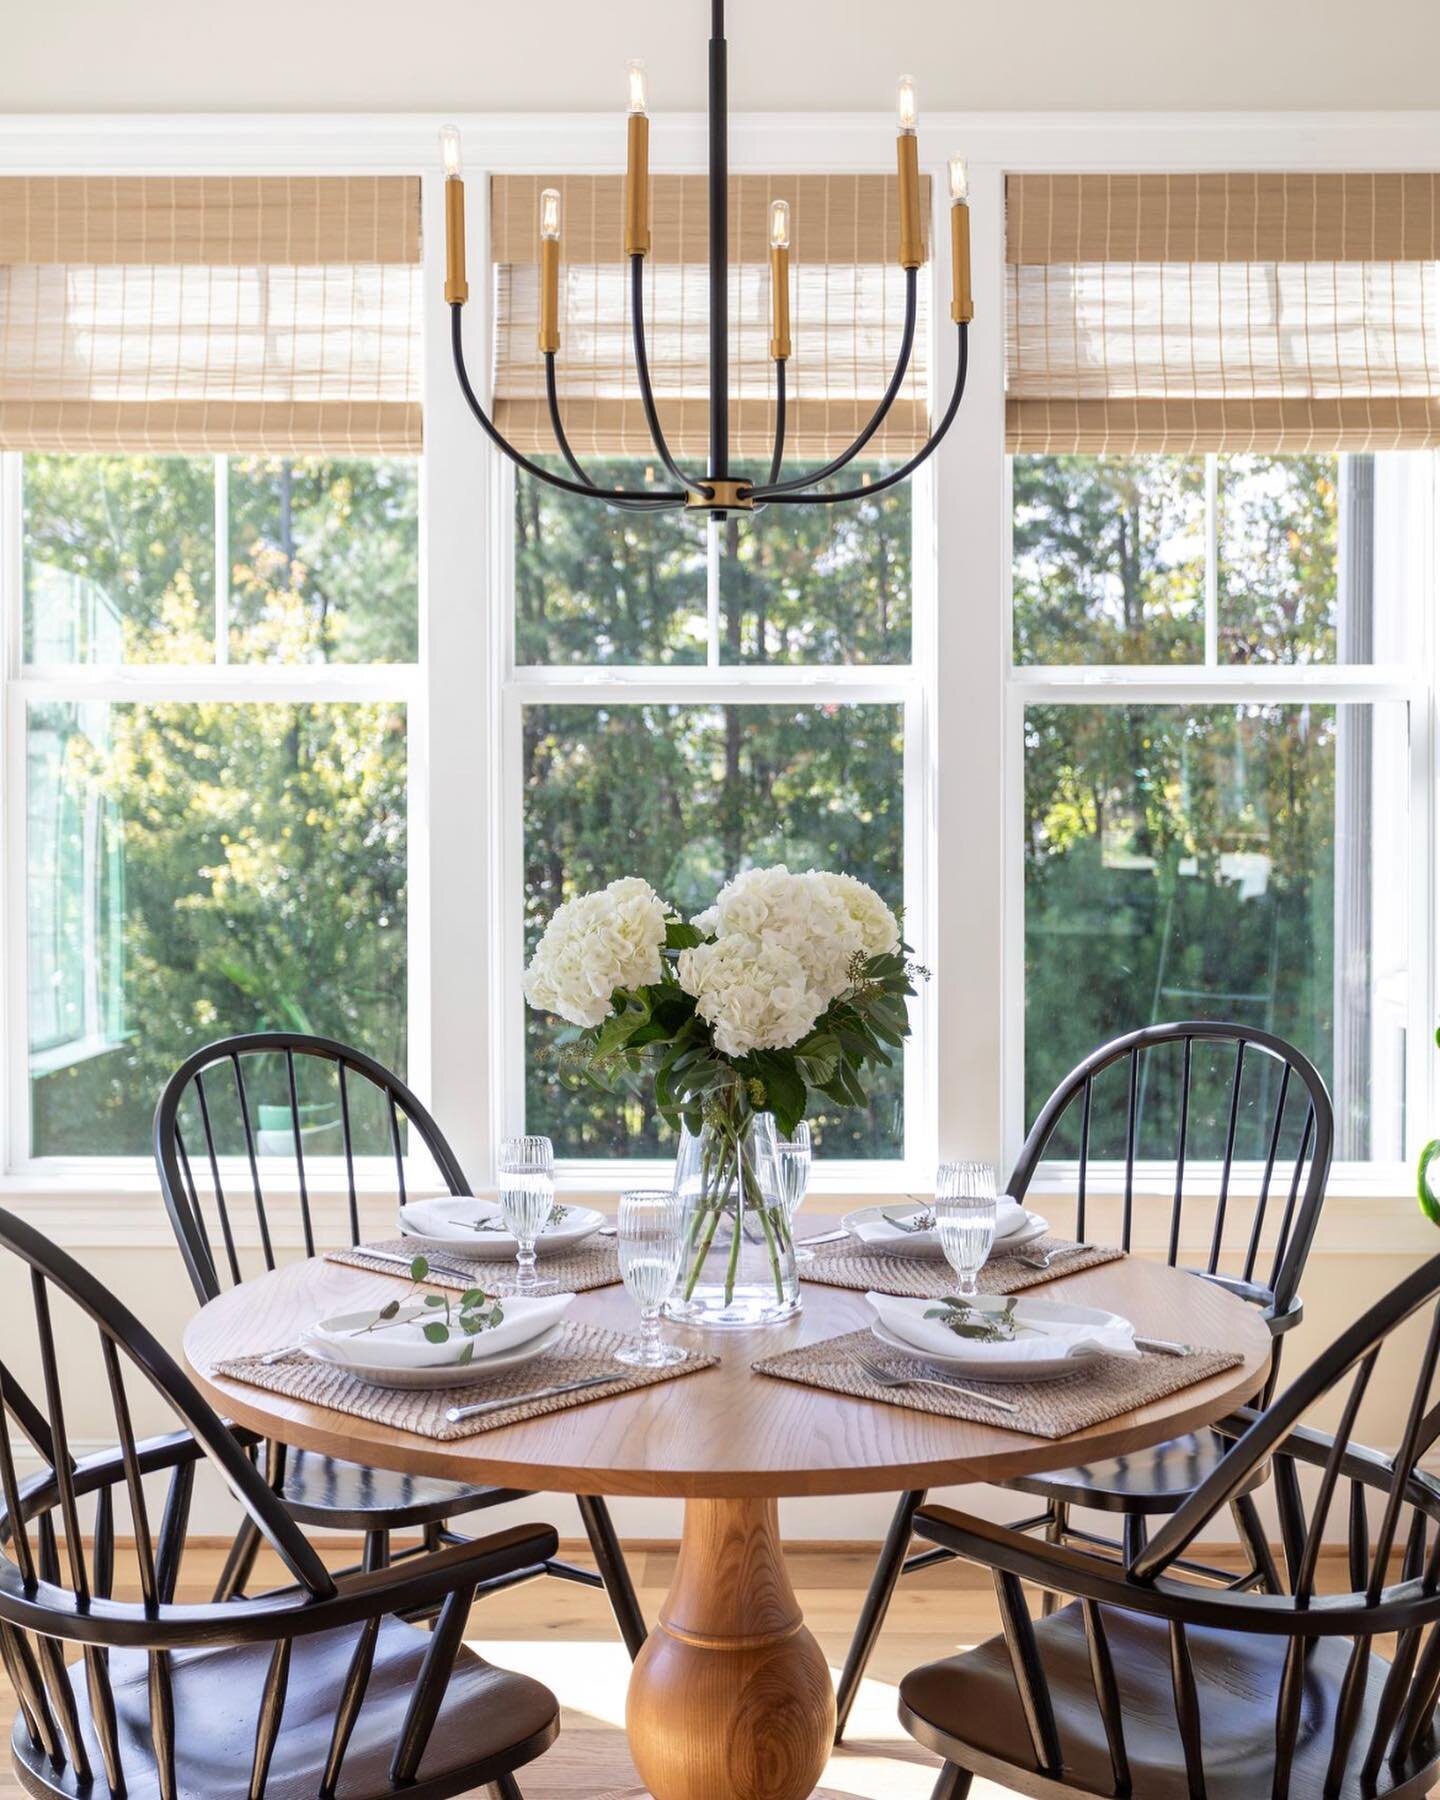 Just a cozy breakfast nook from our &ldquo;Mountain Views&rdquo; project. Here, the client&rsquo;s traditional Windsor dining chairs were repurposed and painted black to coordinate with a new table from @gatcreek . The modern chandelier and textured 